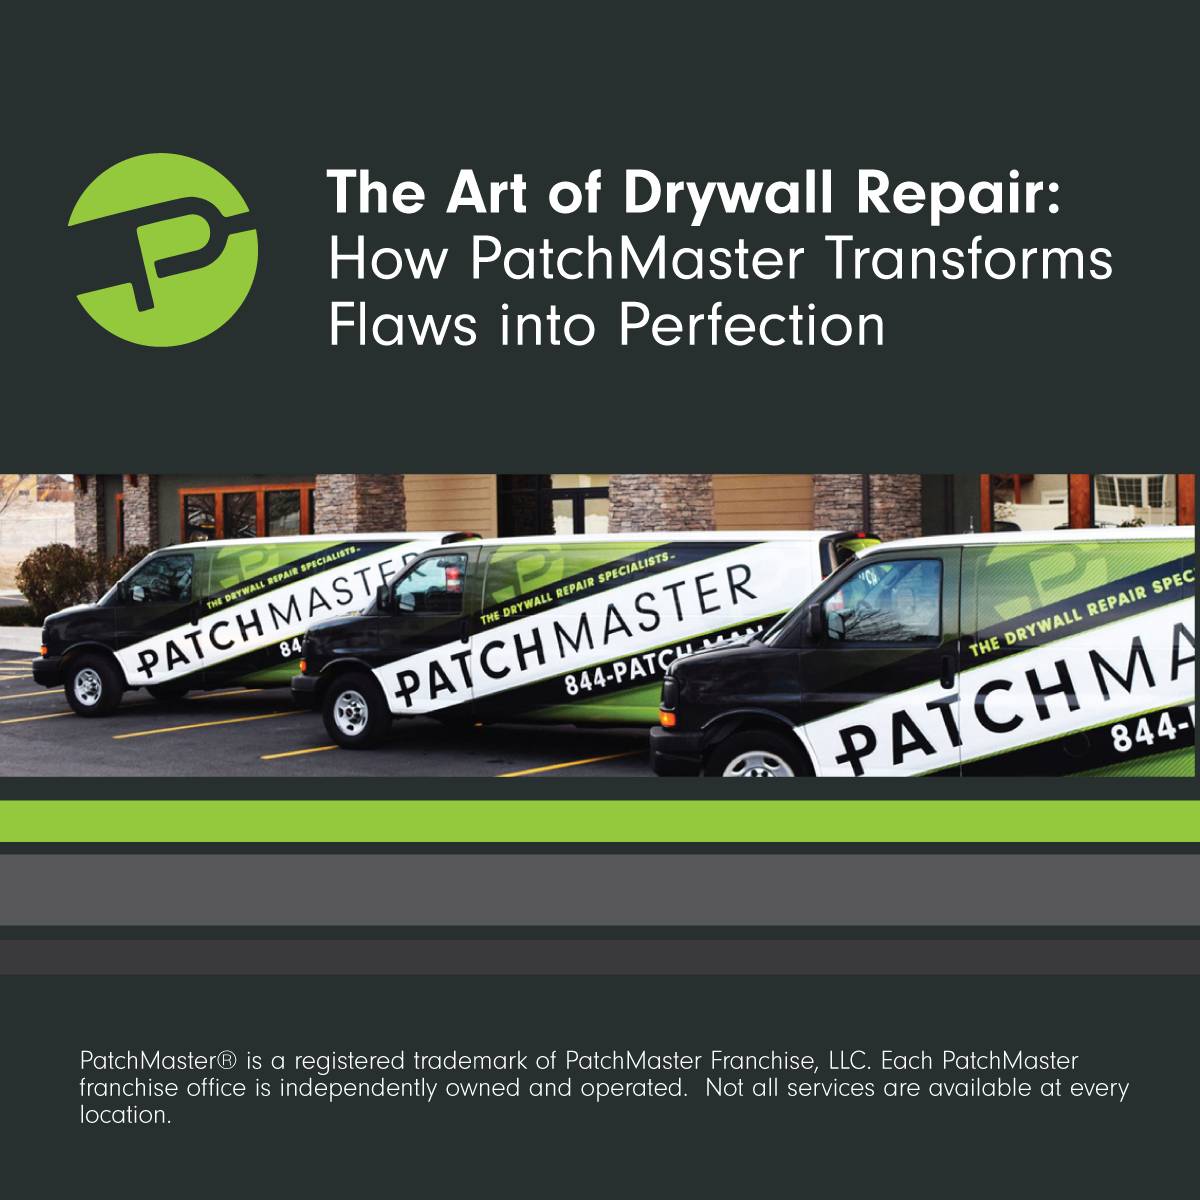 The Art of Drywall Repair: How PatchMaster Transforms Flaws into Perfection